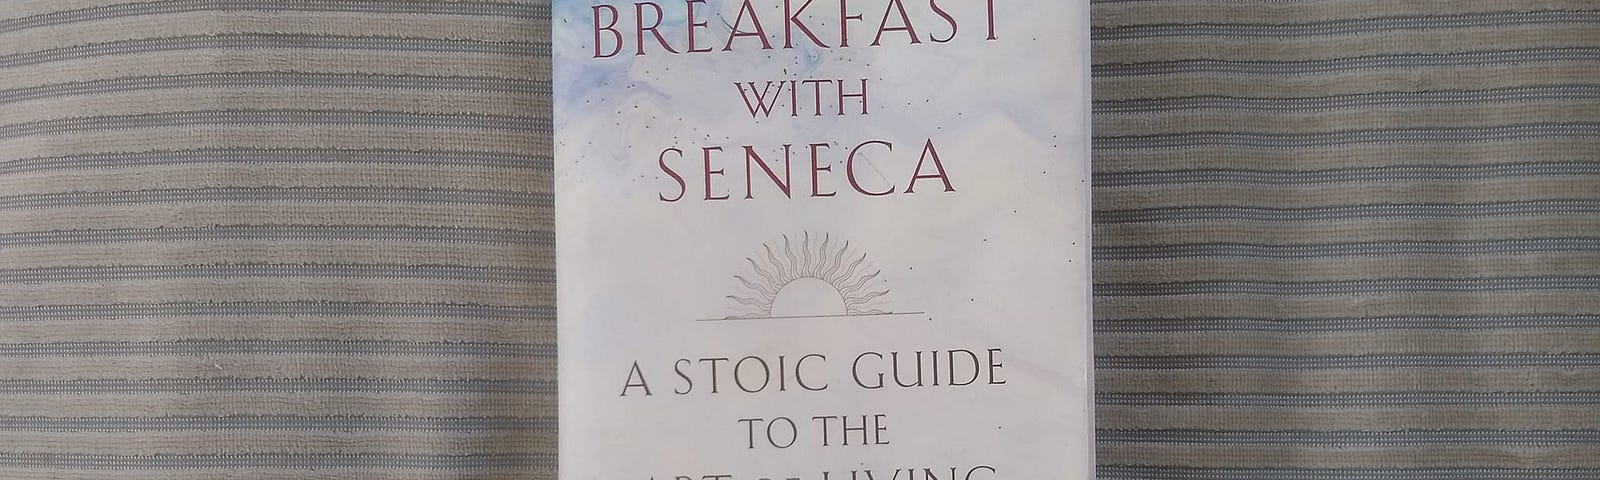 Breakfast With Seneca provides great insight into Stoic philosophy.